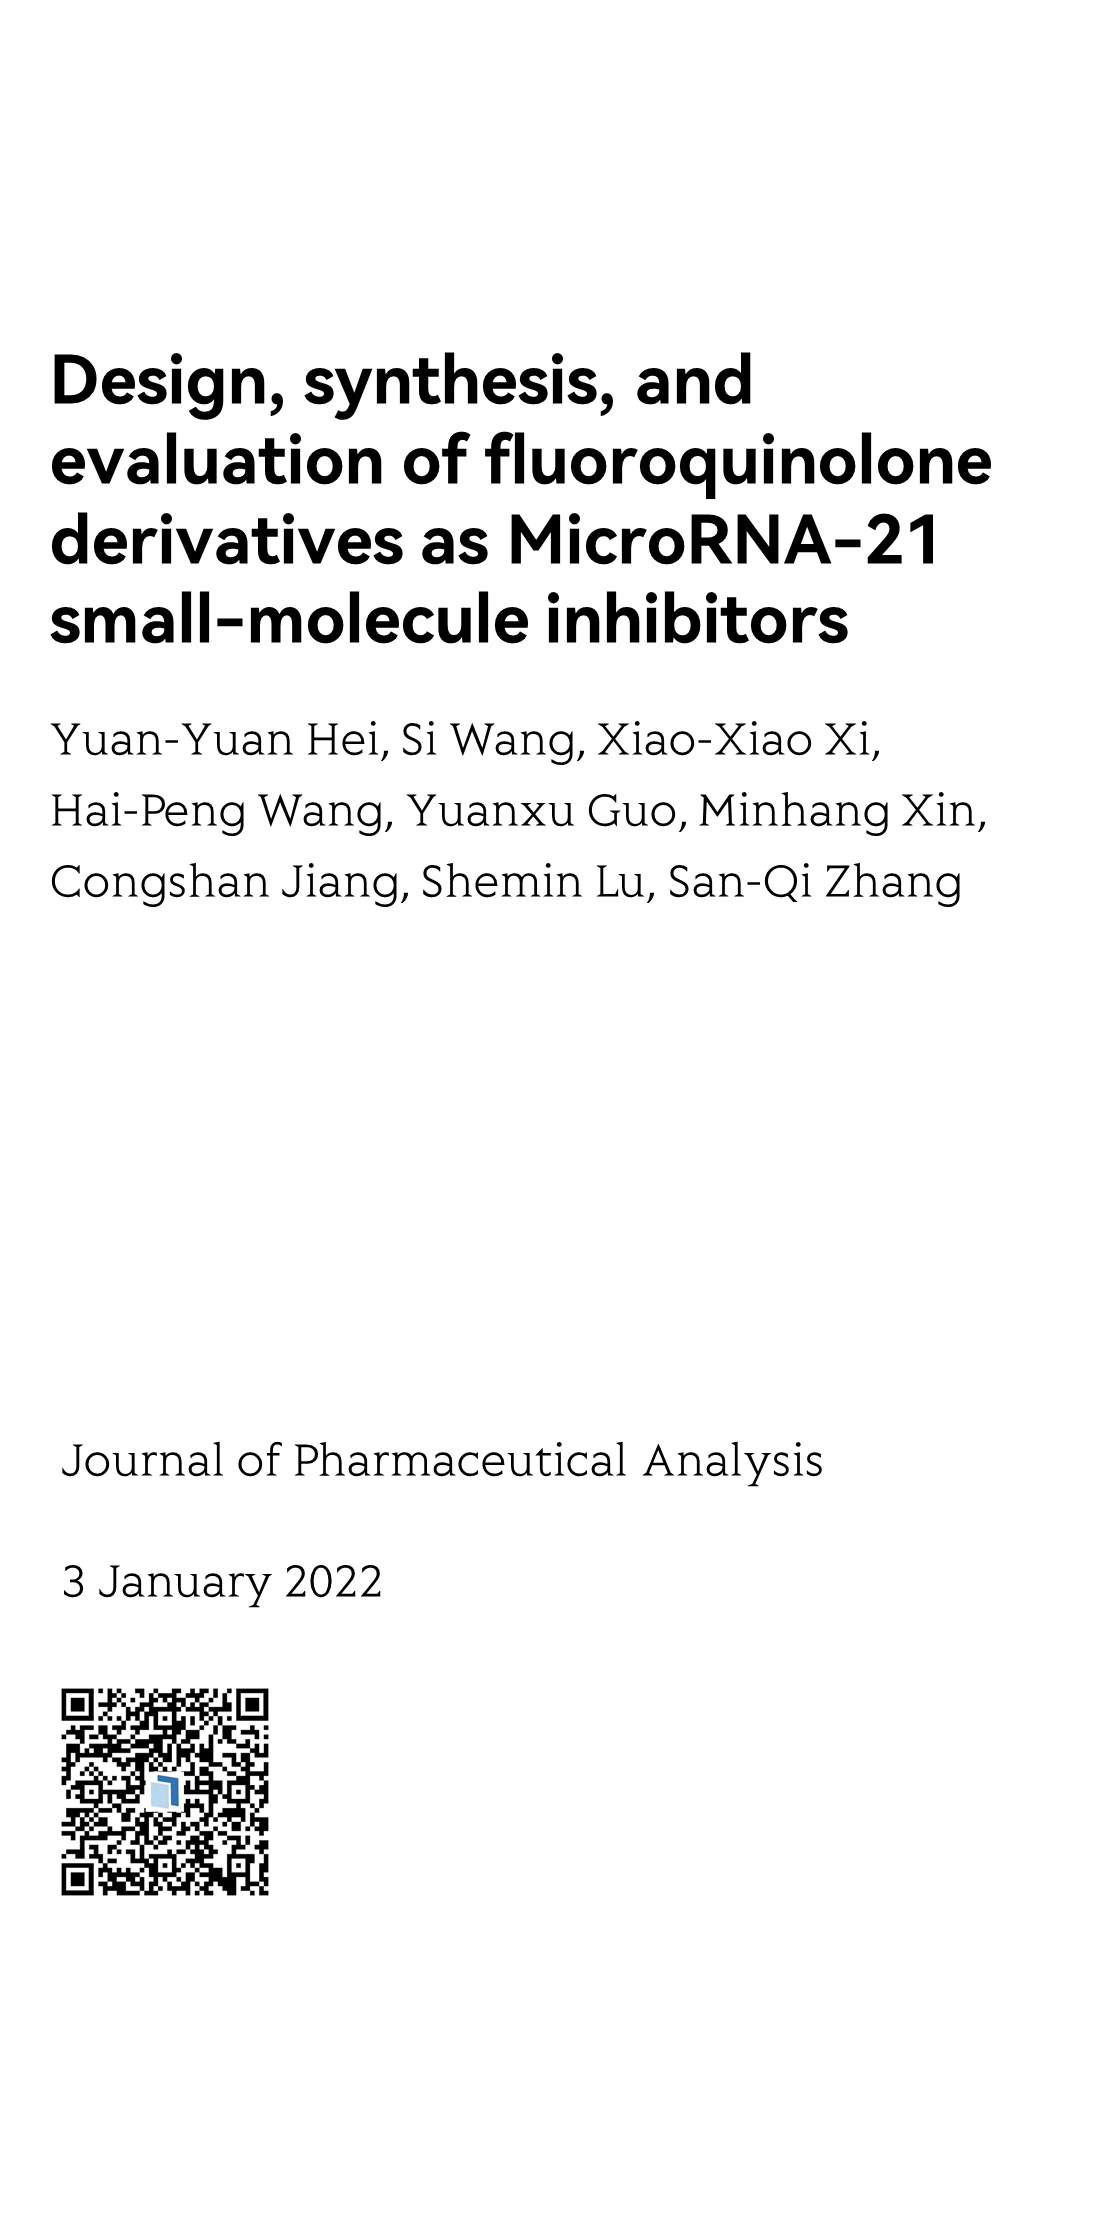 Design, synthesis, and evaluation of fluoroquinolone derivatives as MicroRNA-21 small-molecule inhibitors_1